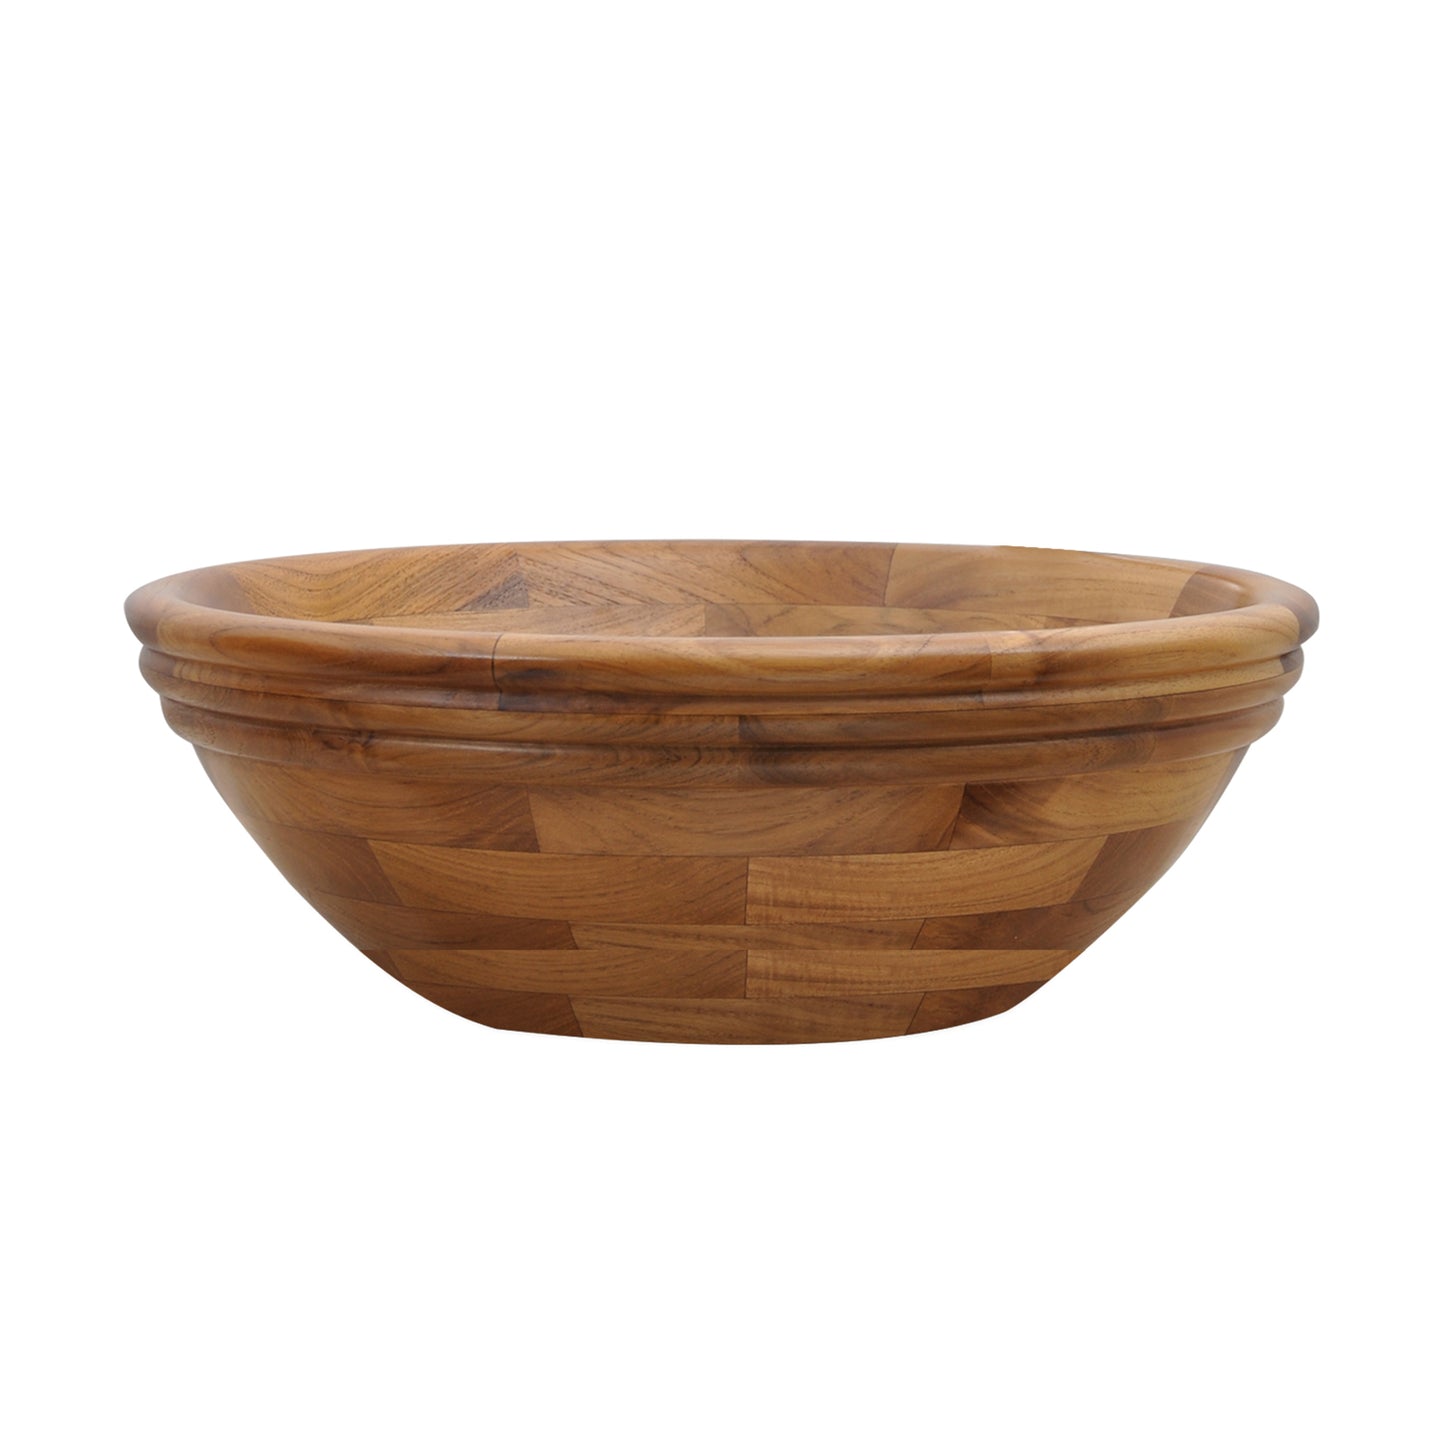 Corcora Teak Vessel Sink 17-1/8" Round with Natural Finish